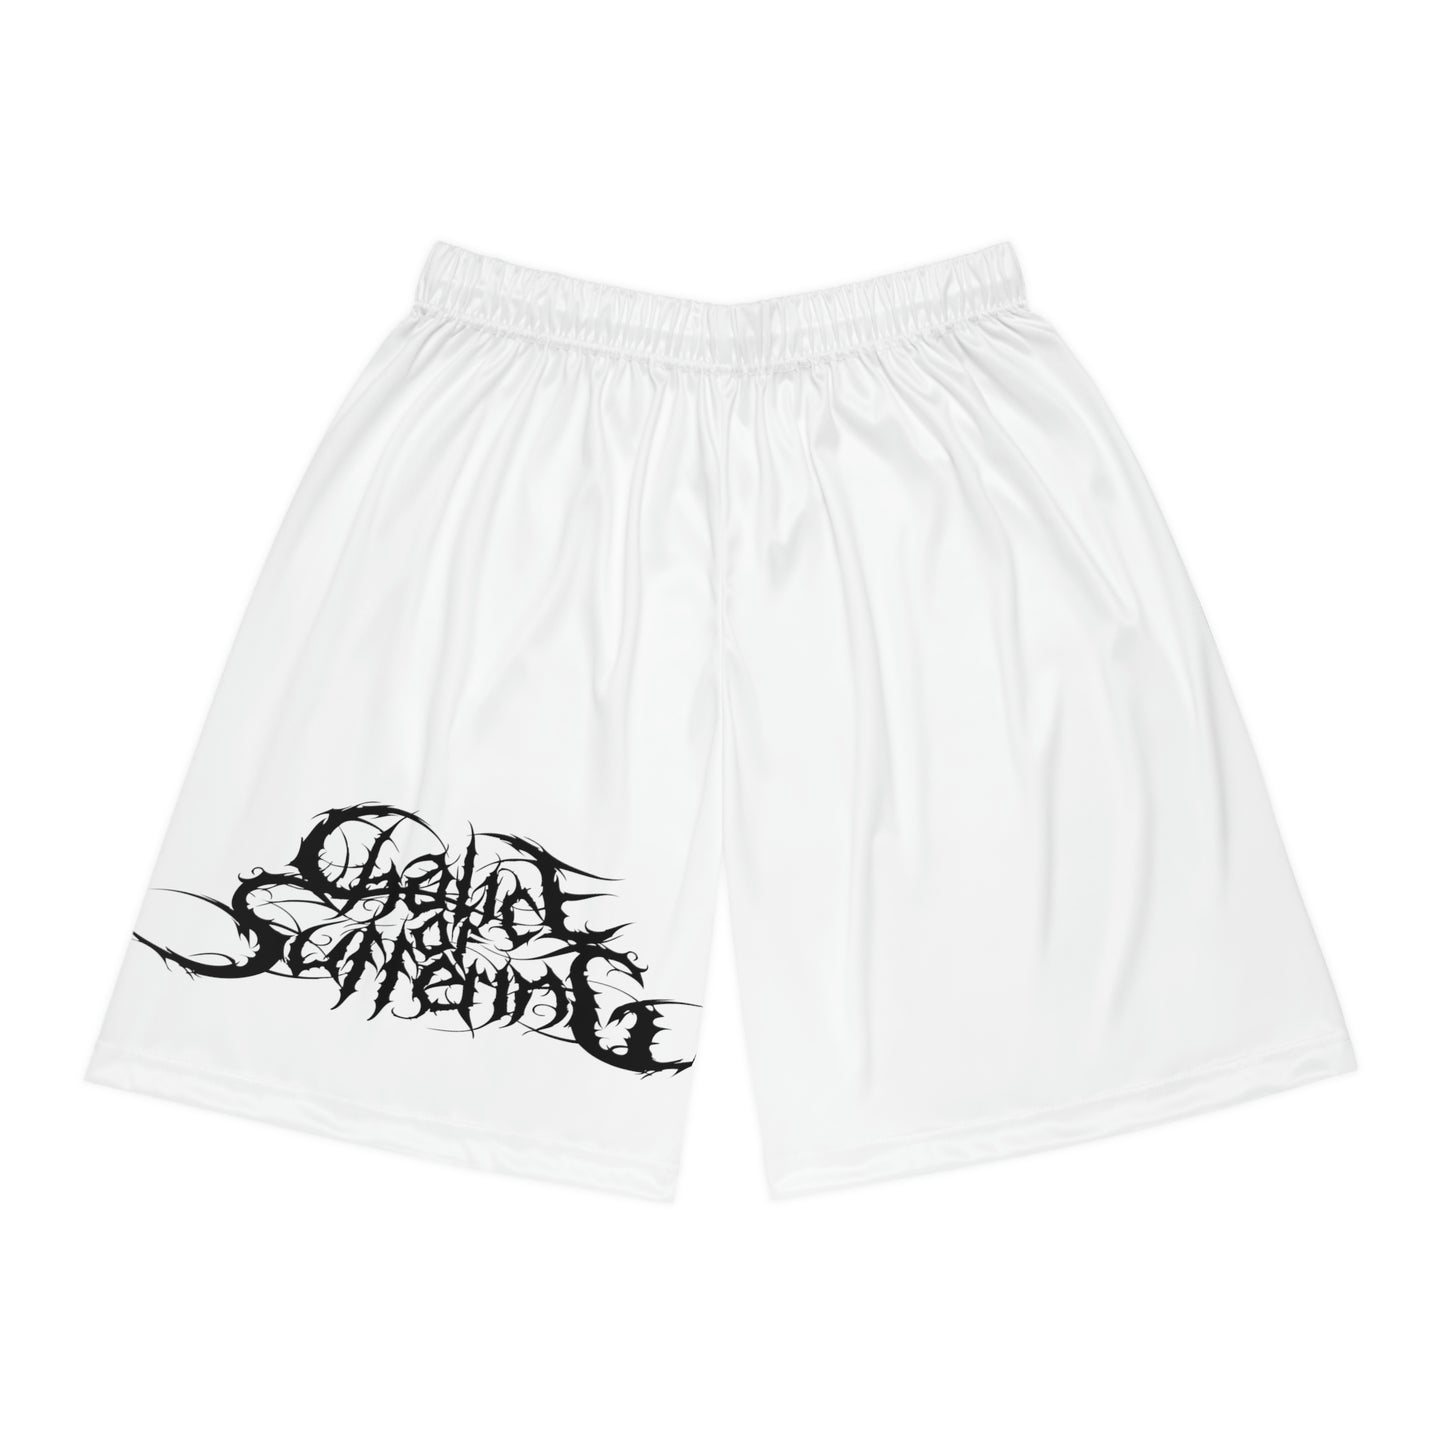 Chalice of Suffering - Basketball Shorts